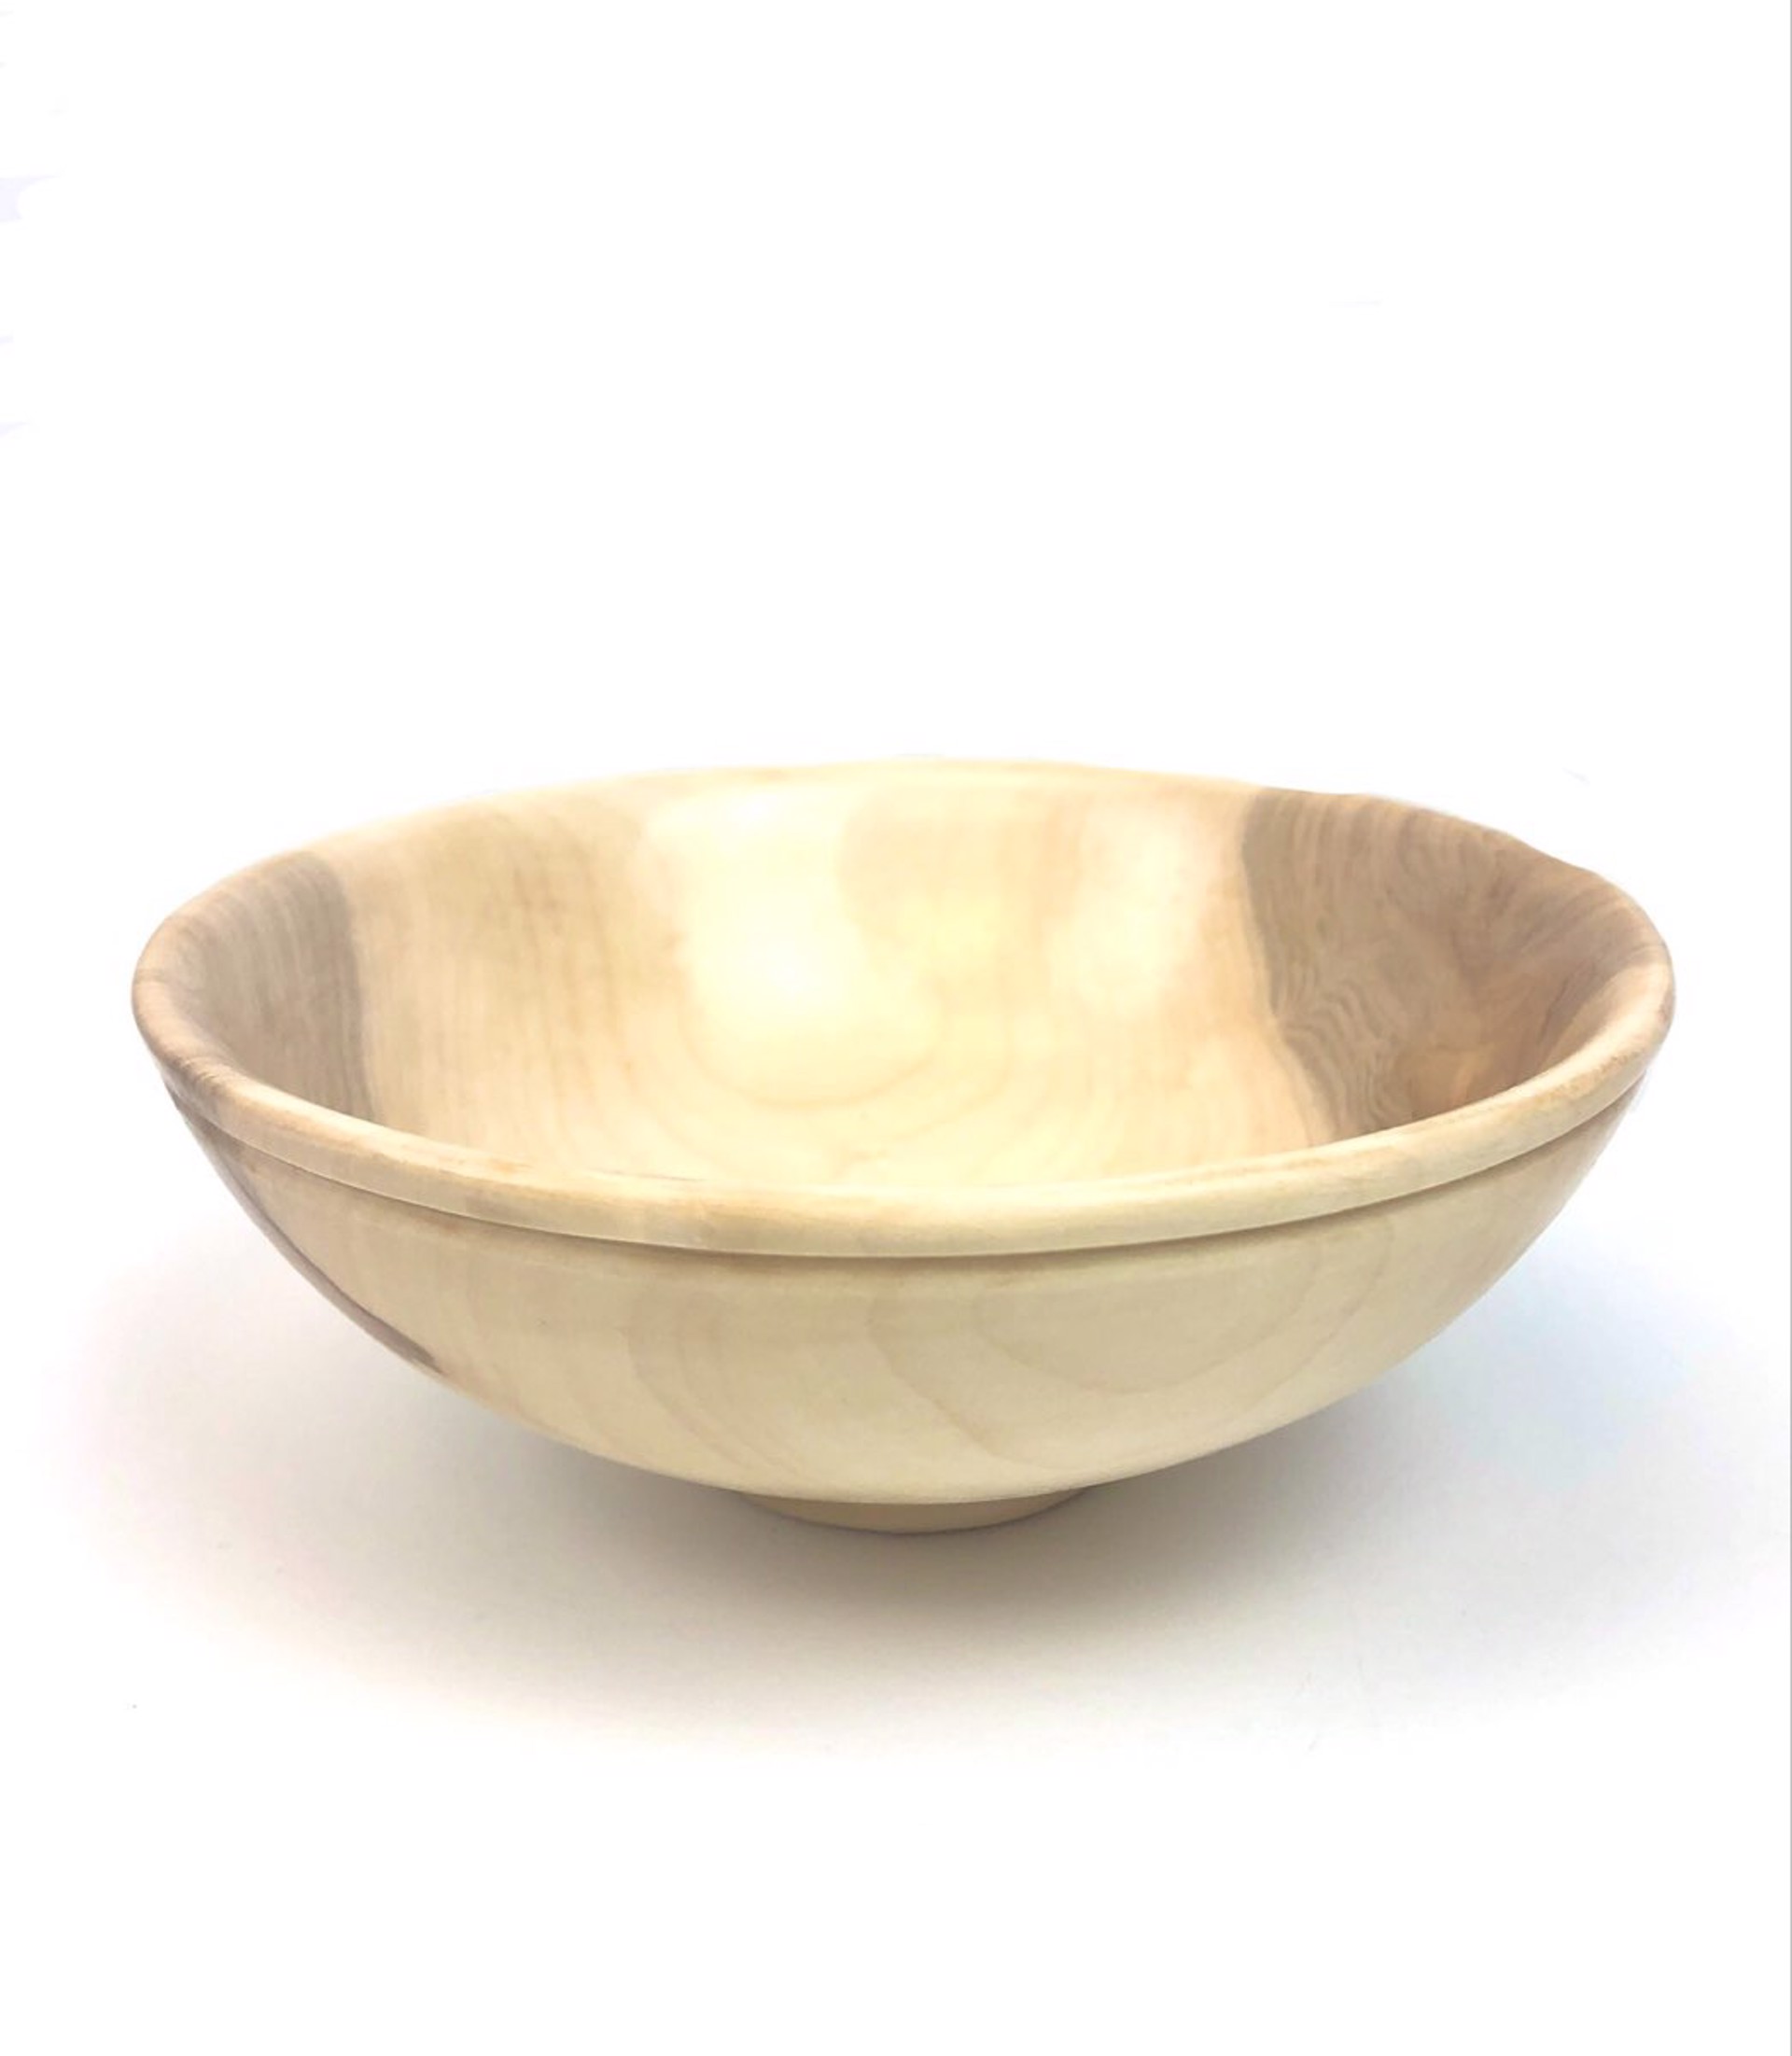 Maple Bowl by Don Moore